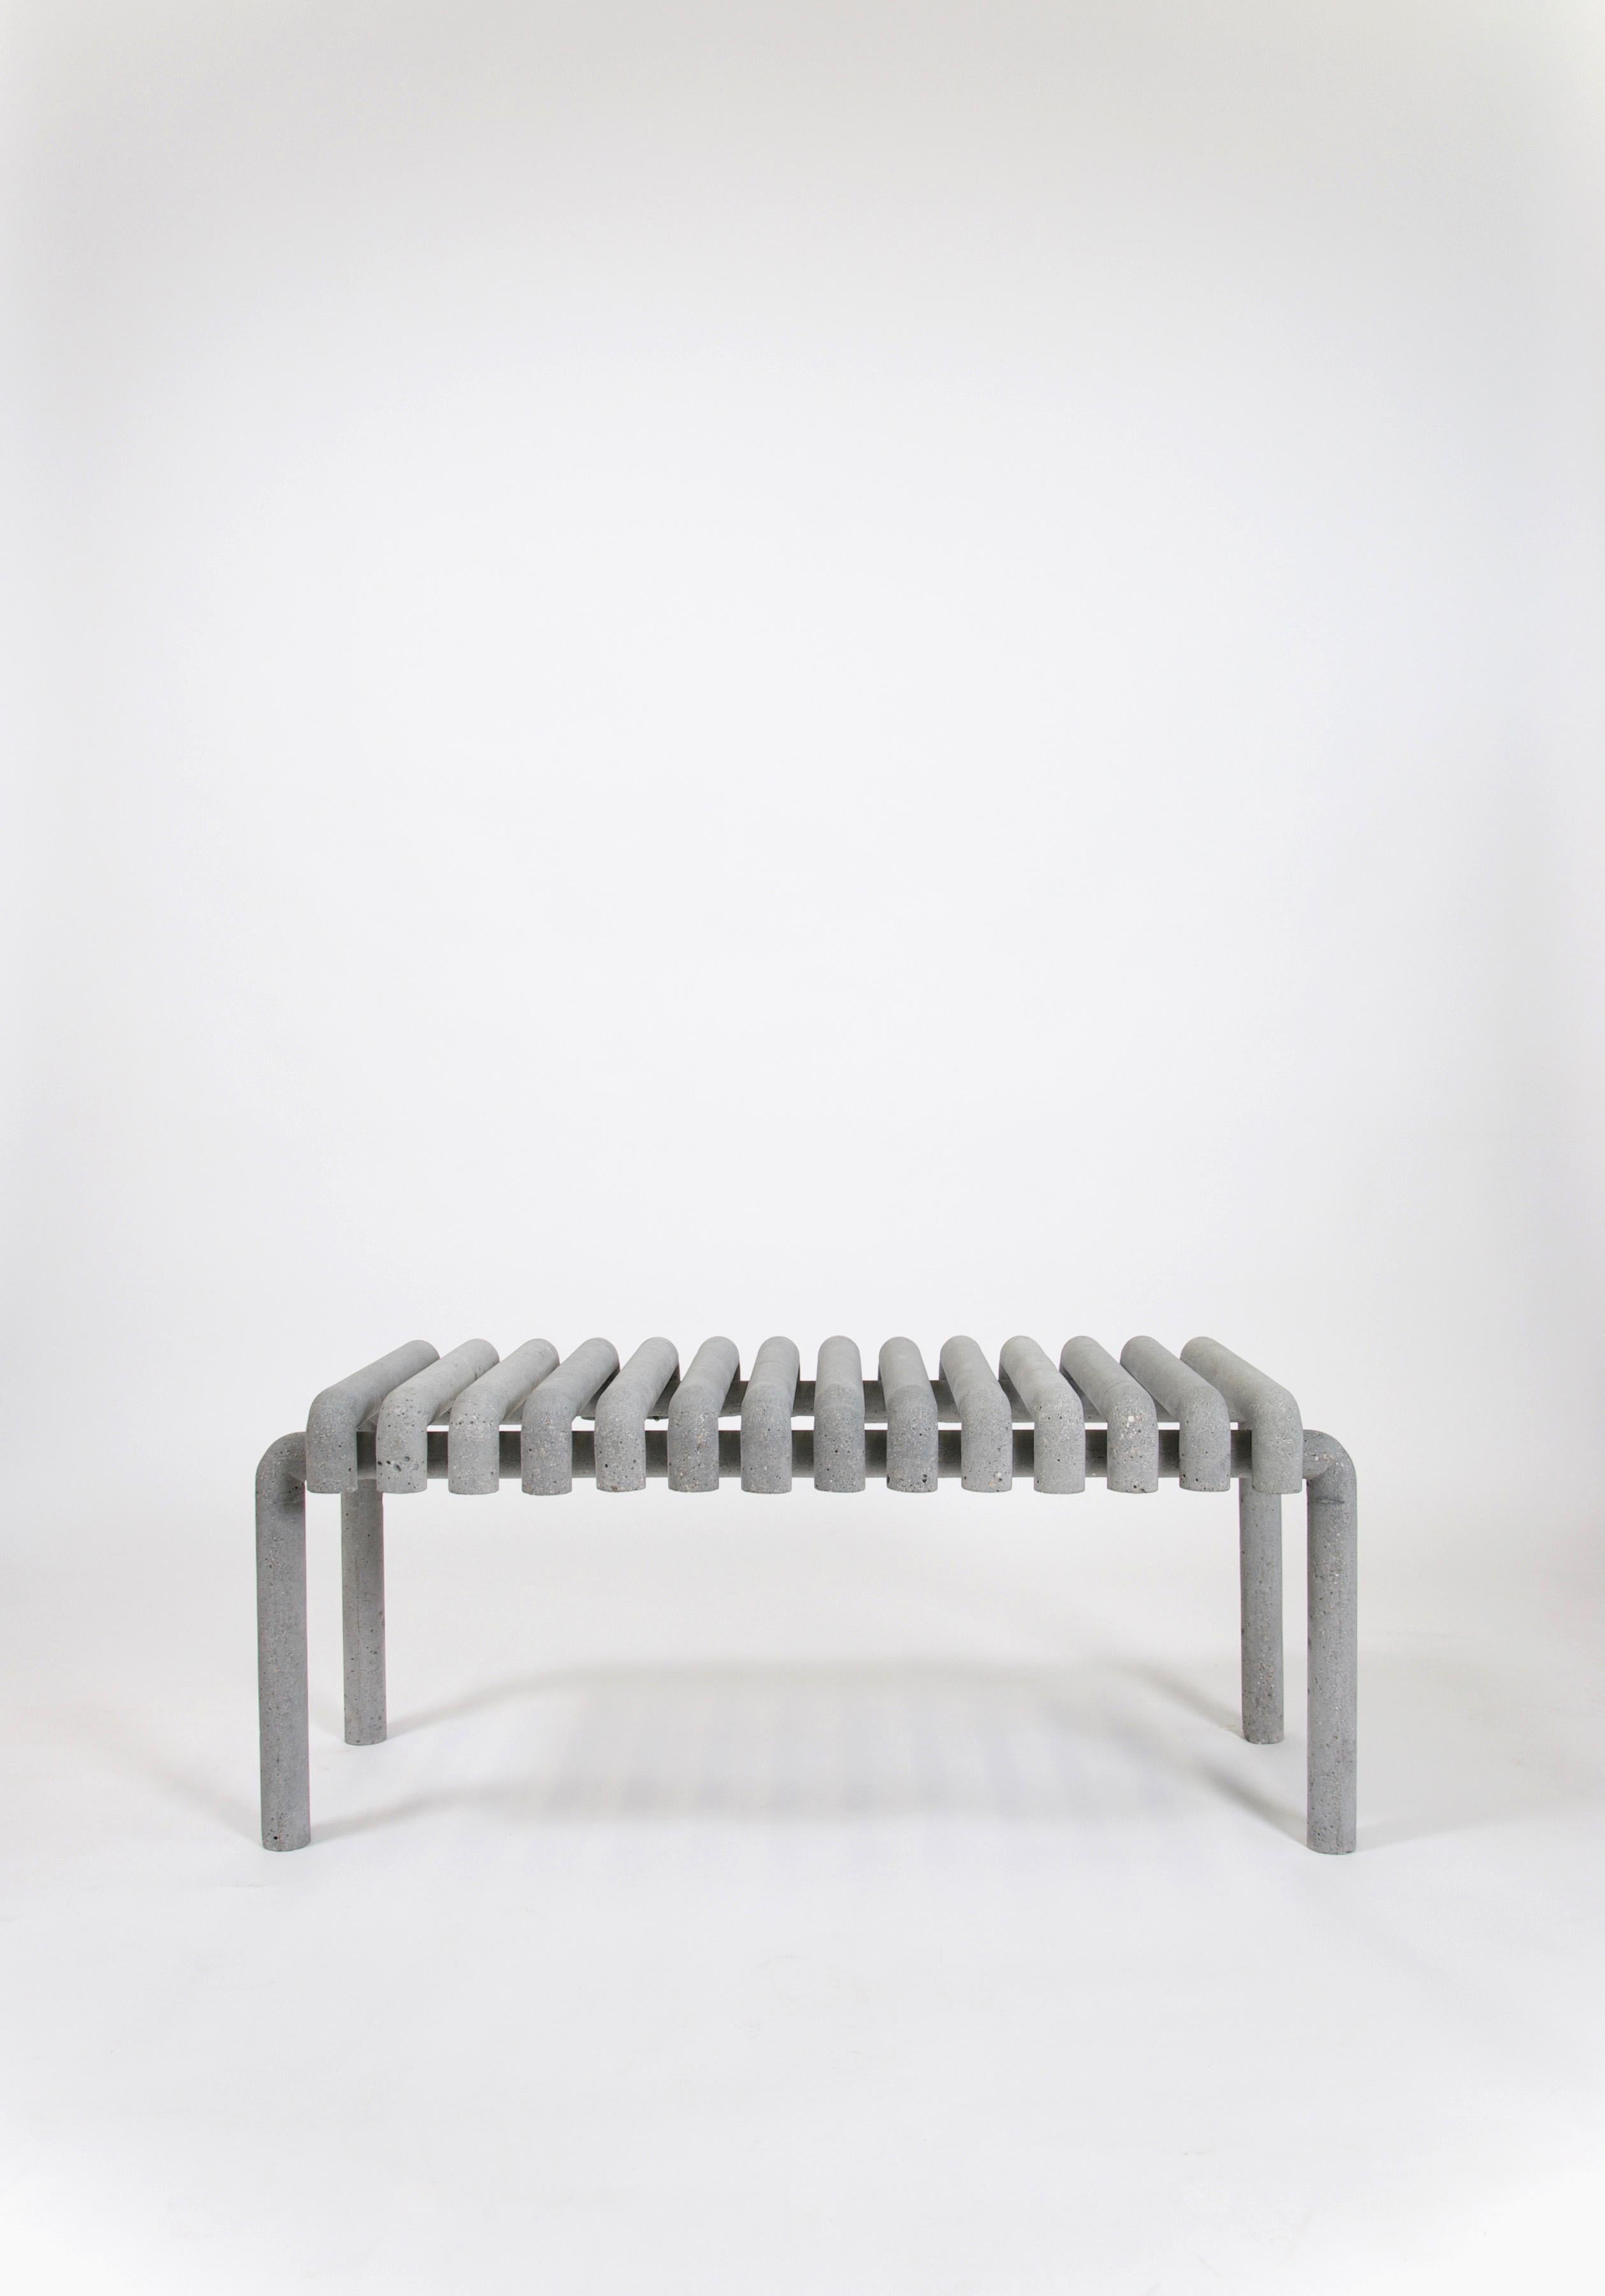 Concrete bench pool by Helder Barbosa
Materials: Concrete
Dimensions: 100 x 40 x 45 cm

Trained as a craftsman (école Boulle, 2014), Helder Barbosa is a designer who lives and works in Paris.
Attracted by minimalist shapes, he creates furniture